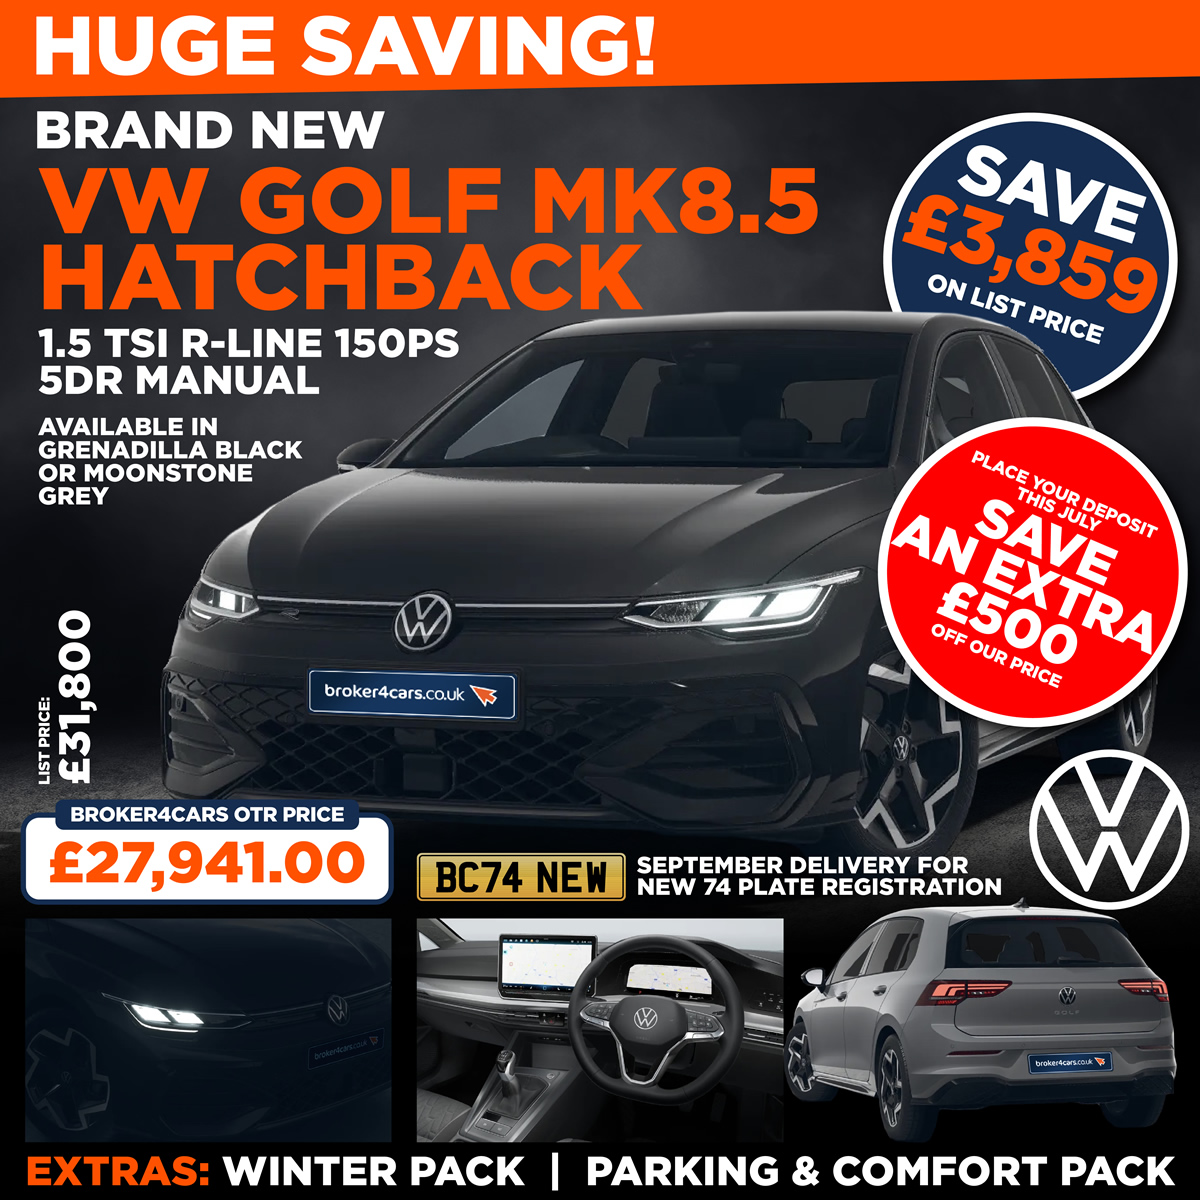 NEW VW GOLF HATCHBACK MK8.5 1.5 TSI Match 150ps 5dr Manual. Available in Grenadilla Black or Moonstone Grey. Winter Pack. Parking & Comfort Pack. VW's are currently due September for the new 74 plate registration. List Price £29,430 so saving £3,504. Broker4Cars Price £25,926 OTR. Place your deposit this July, save an extra £500